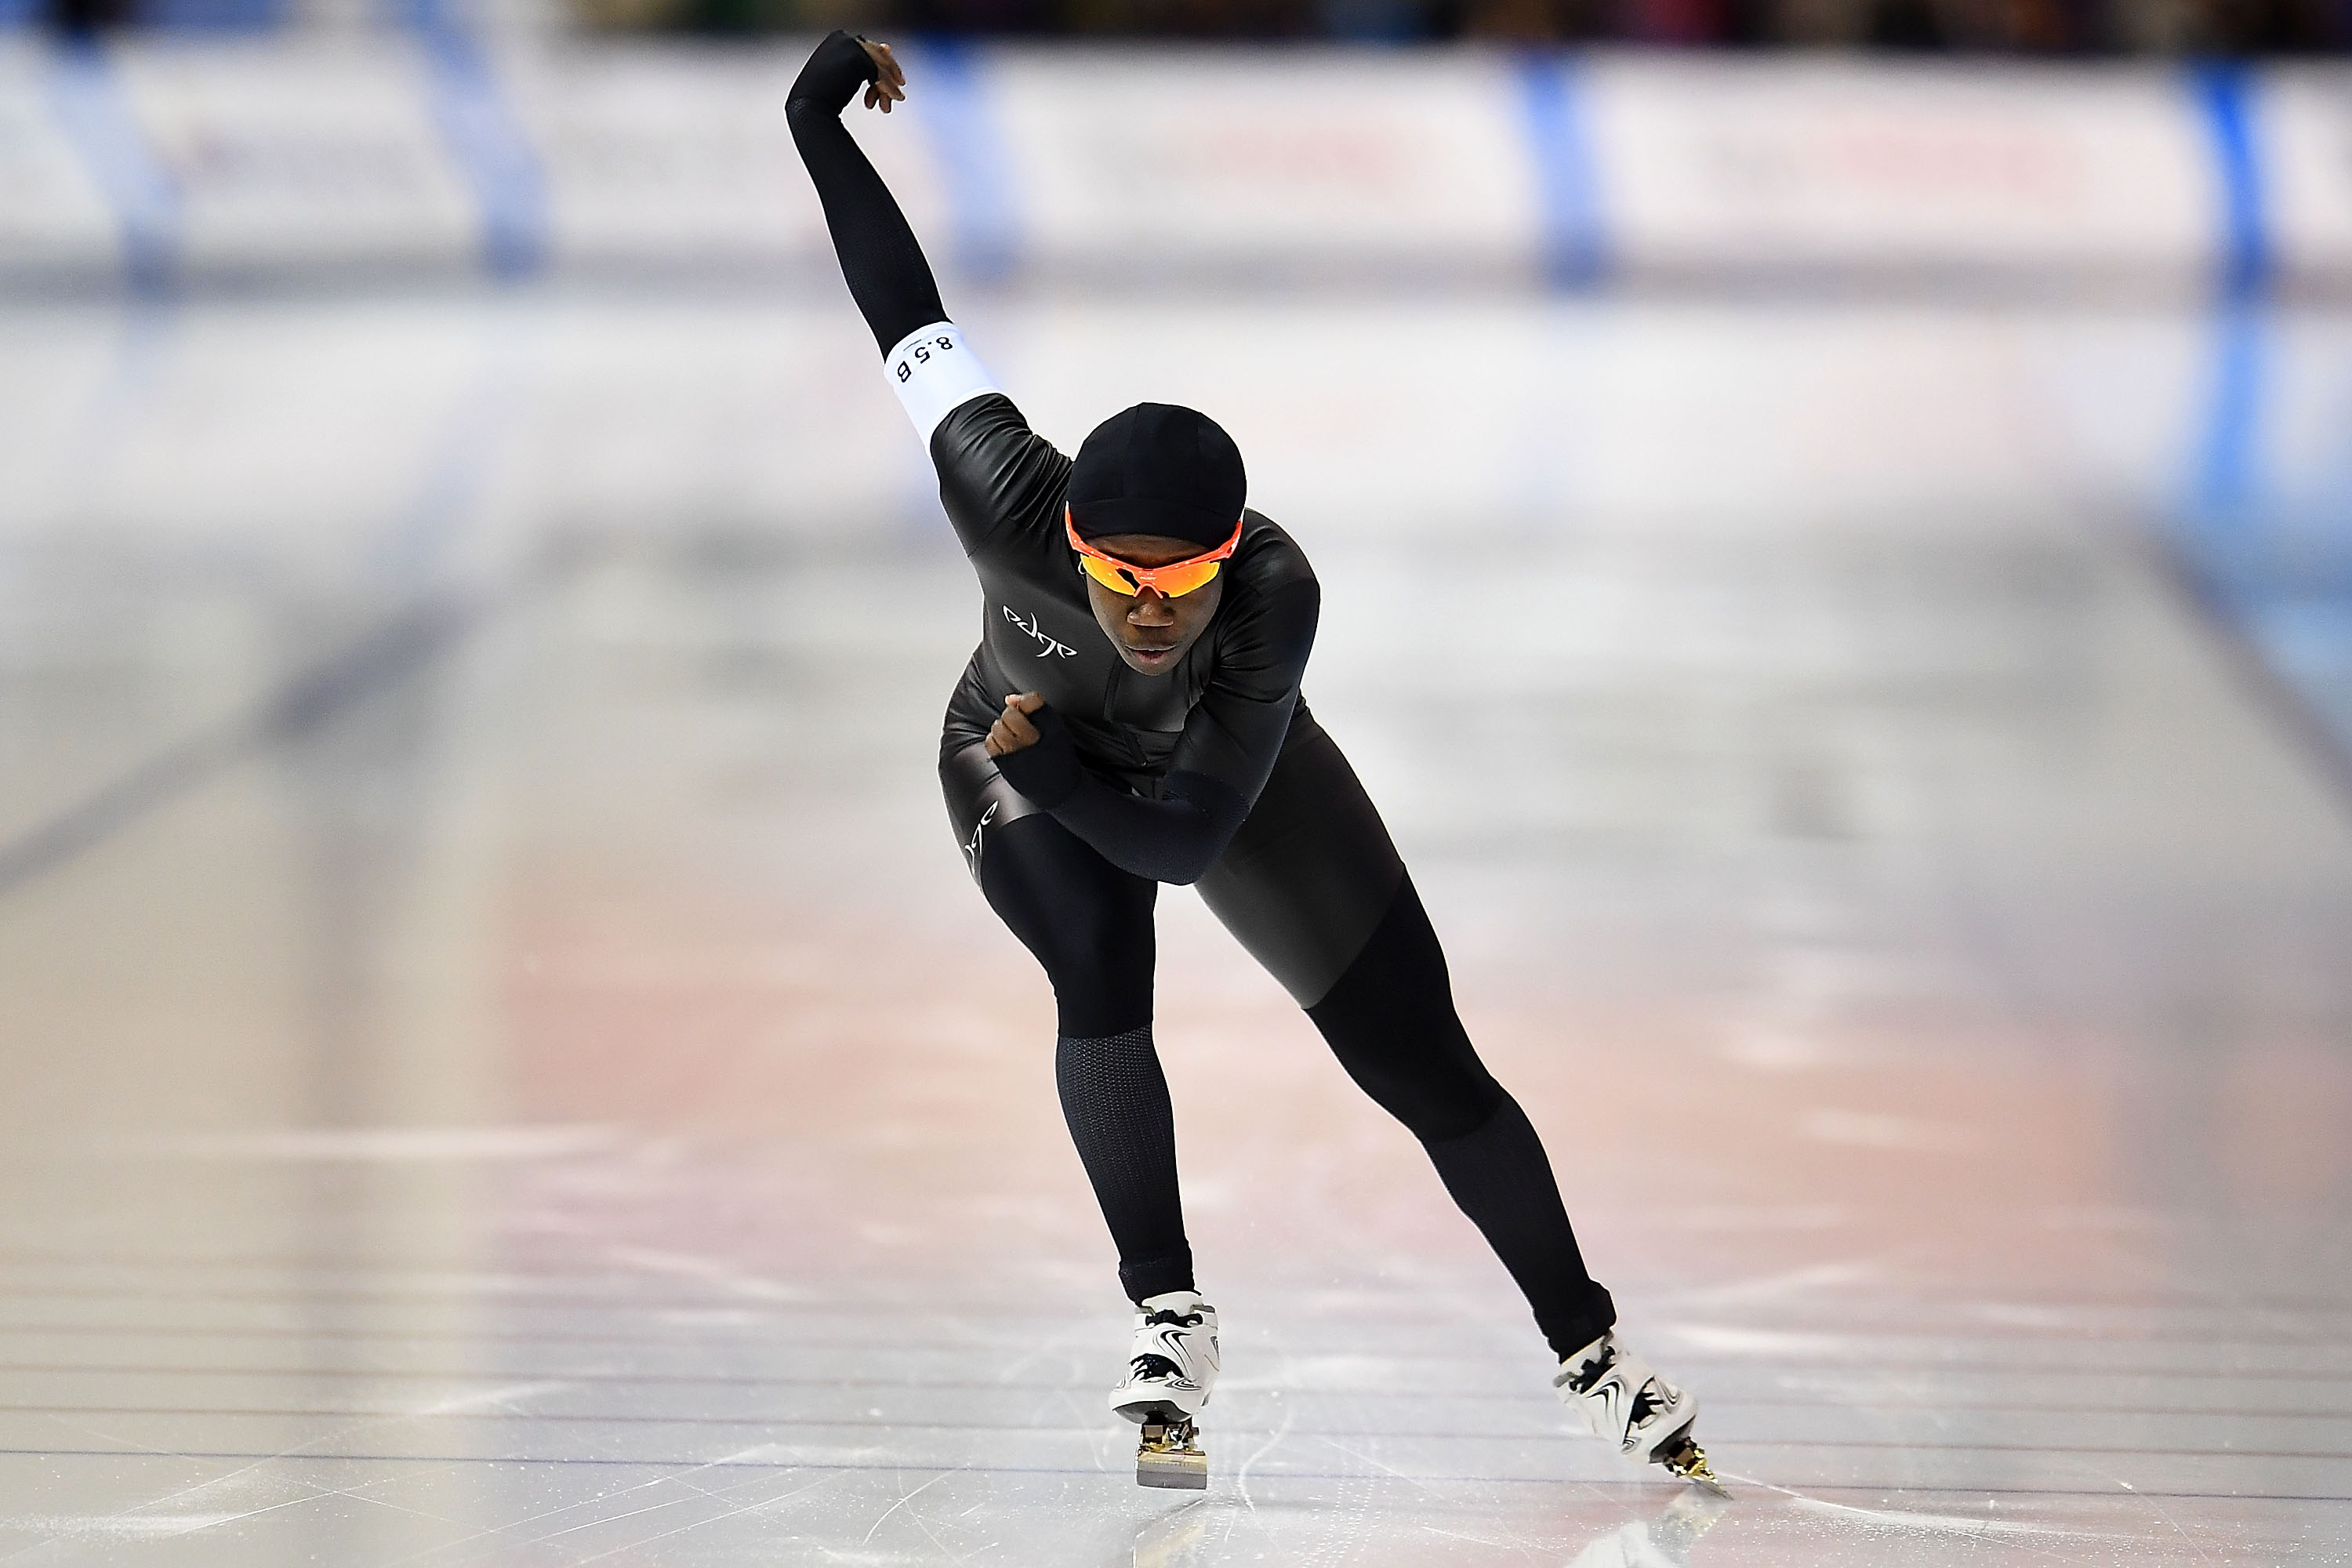 Erin Jackson competes in the Ladies 500 meter event during the Long Track Speed Skating Olympic Trials at the Pettit National Ice Center on January 5, 2018 in Milwaukee, Wisconsin. (Stacy Revere—Getty Images)